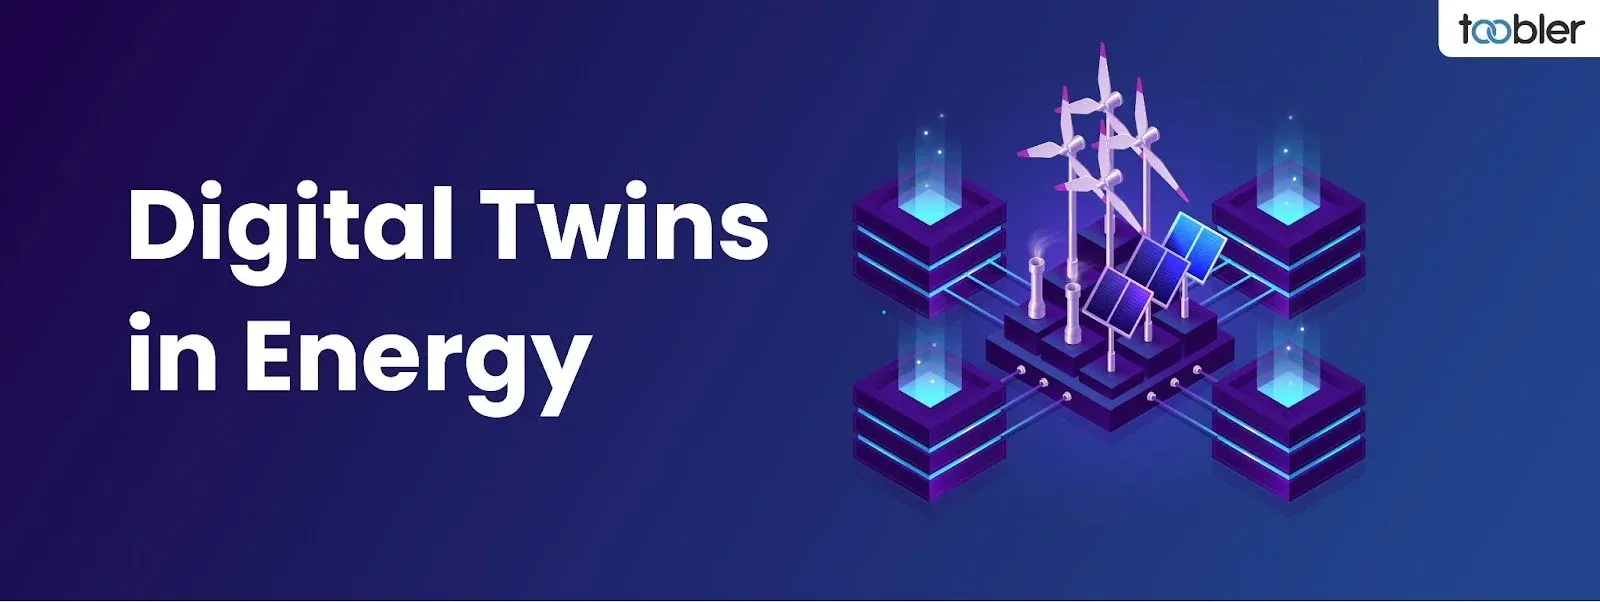 Digital Twins in Energy Industry - A Comprehensive Guide